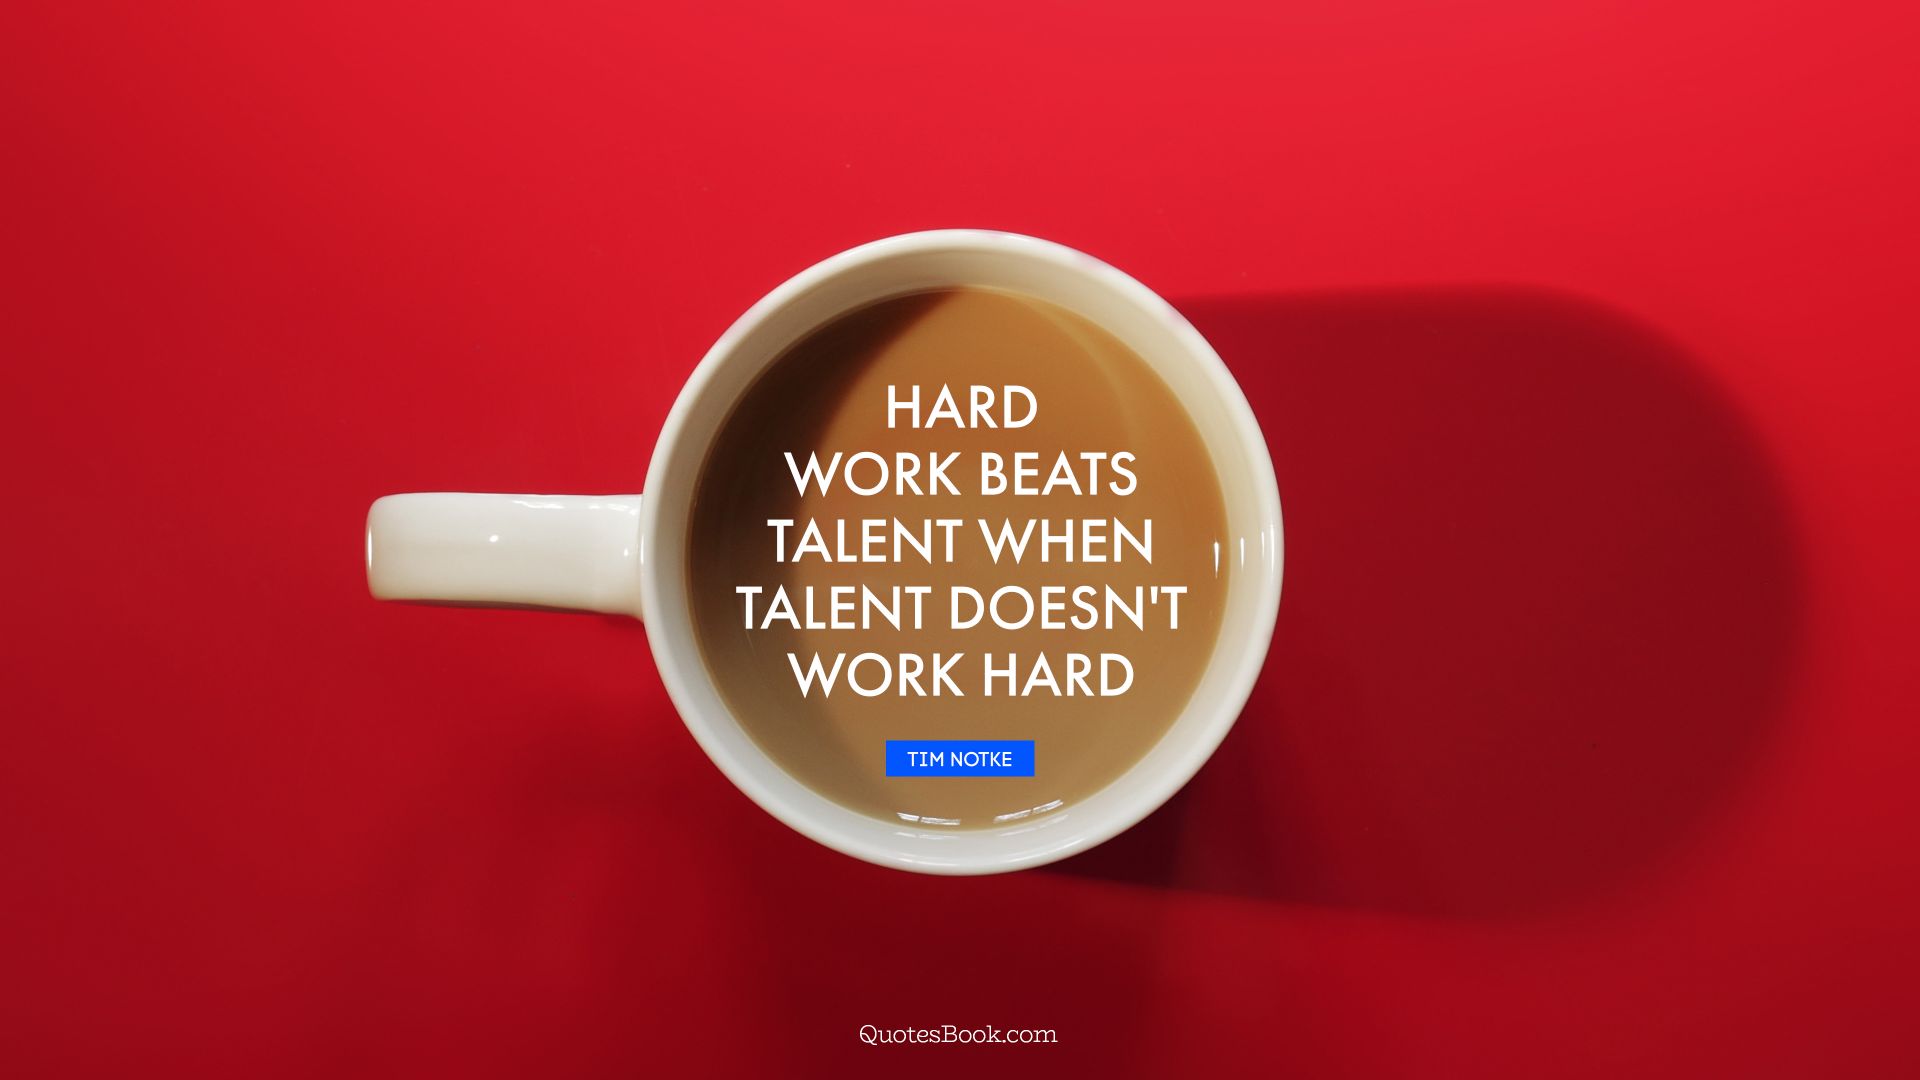 Hard work beats talent when talent doesn't work hard. - Quote by Tim Notke